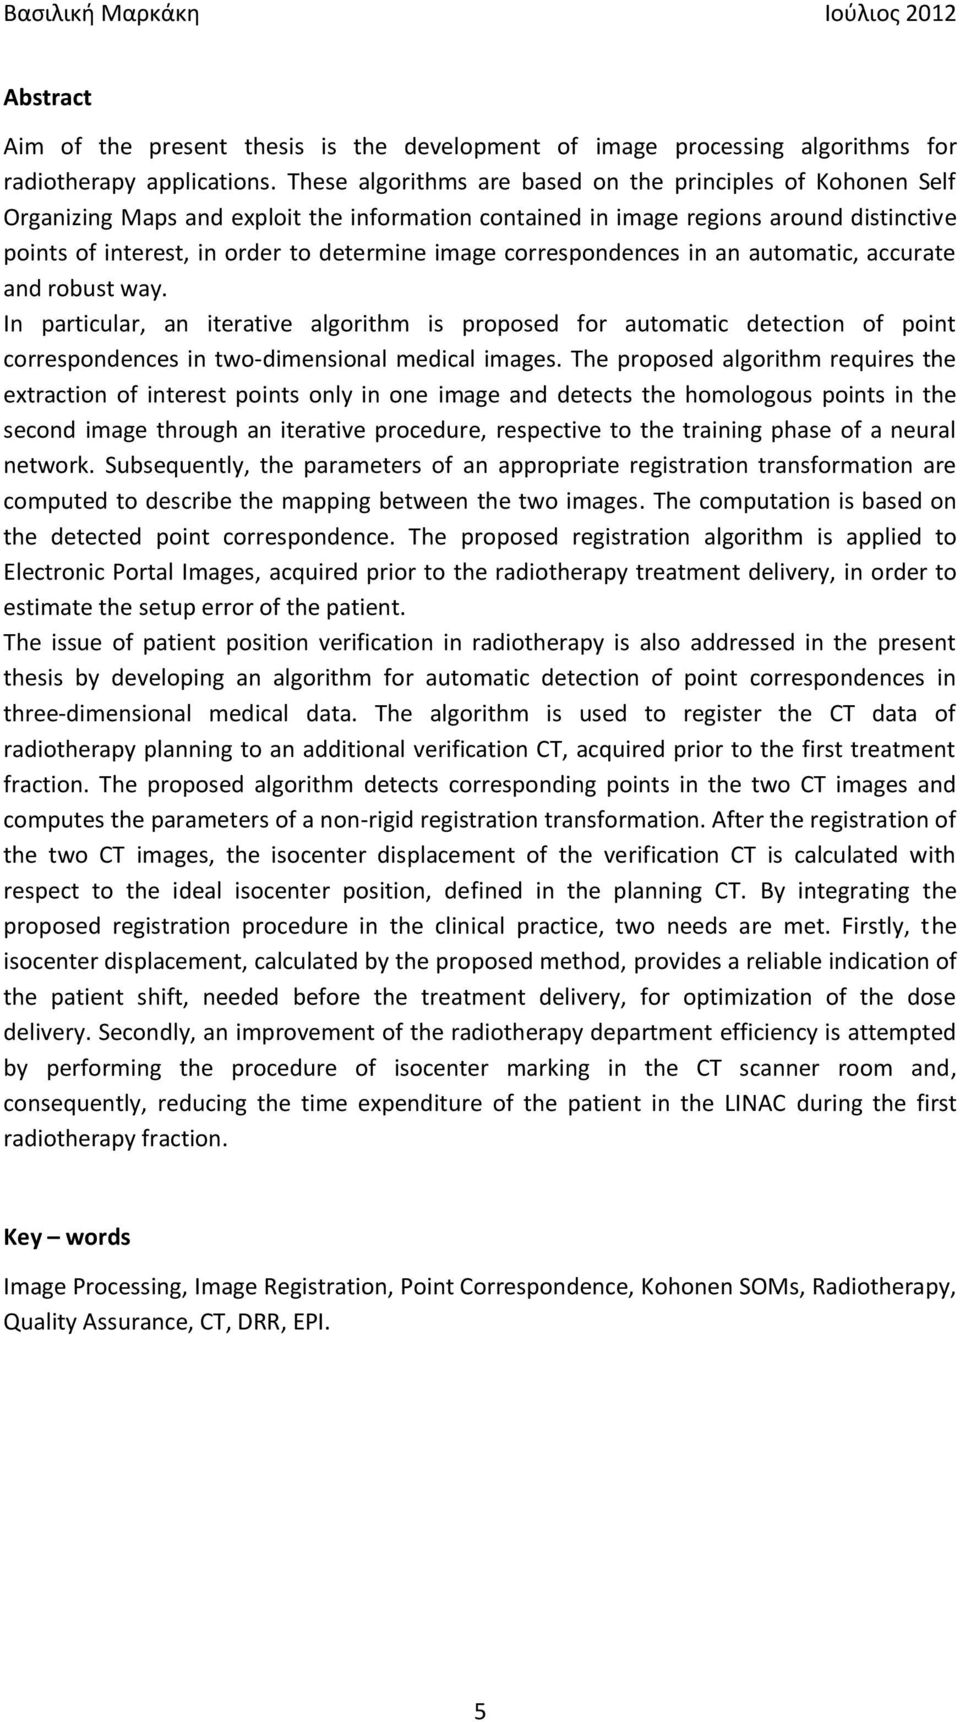 correspondences in an automatic, accurate and robust way. In particular, an iterative algorithm is proposed for automatic detection of point correspondences in two-dimensional medical images.